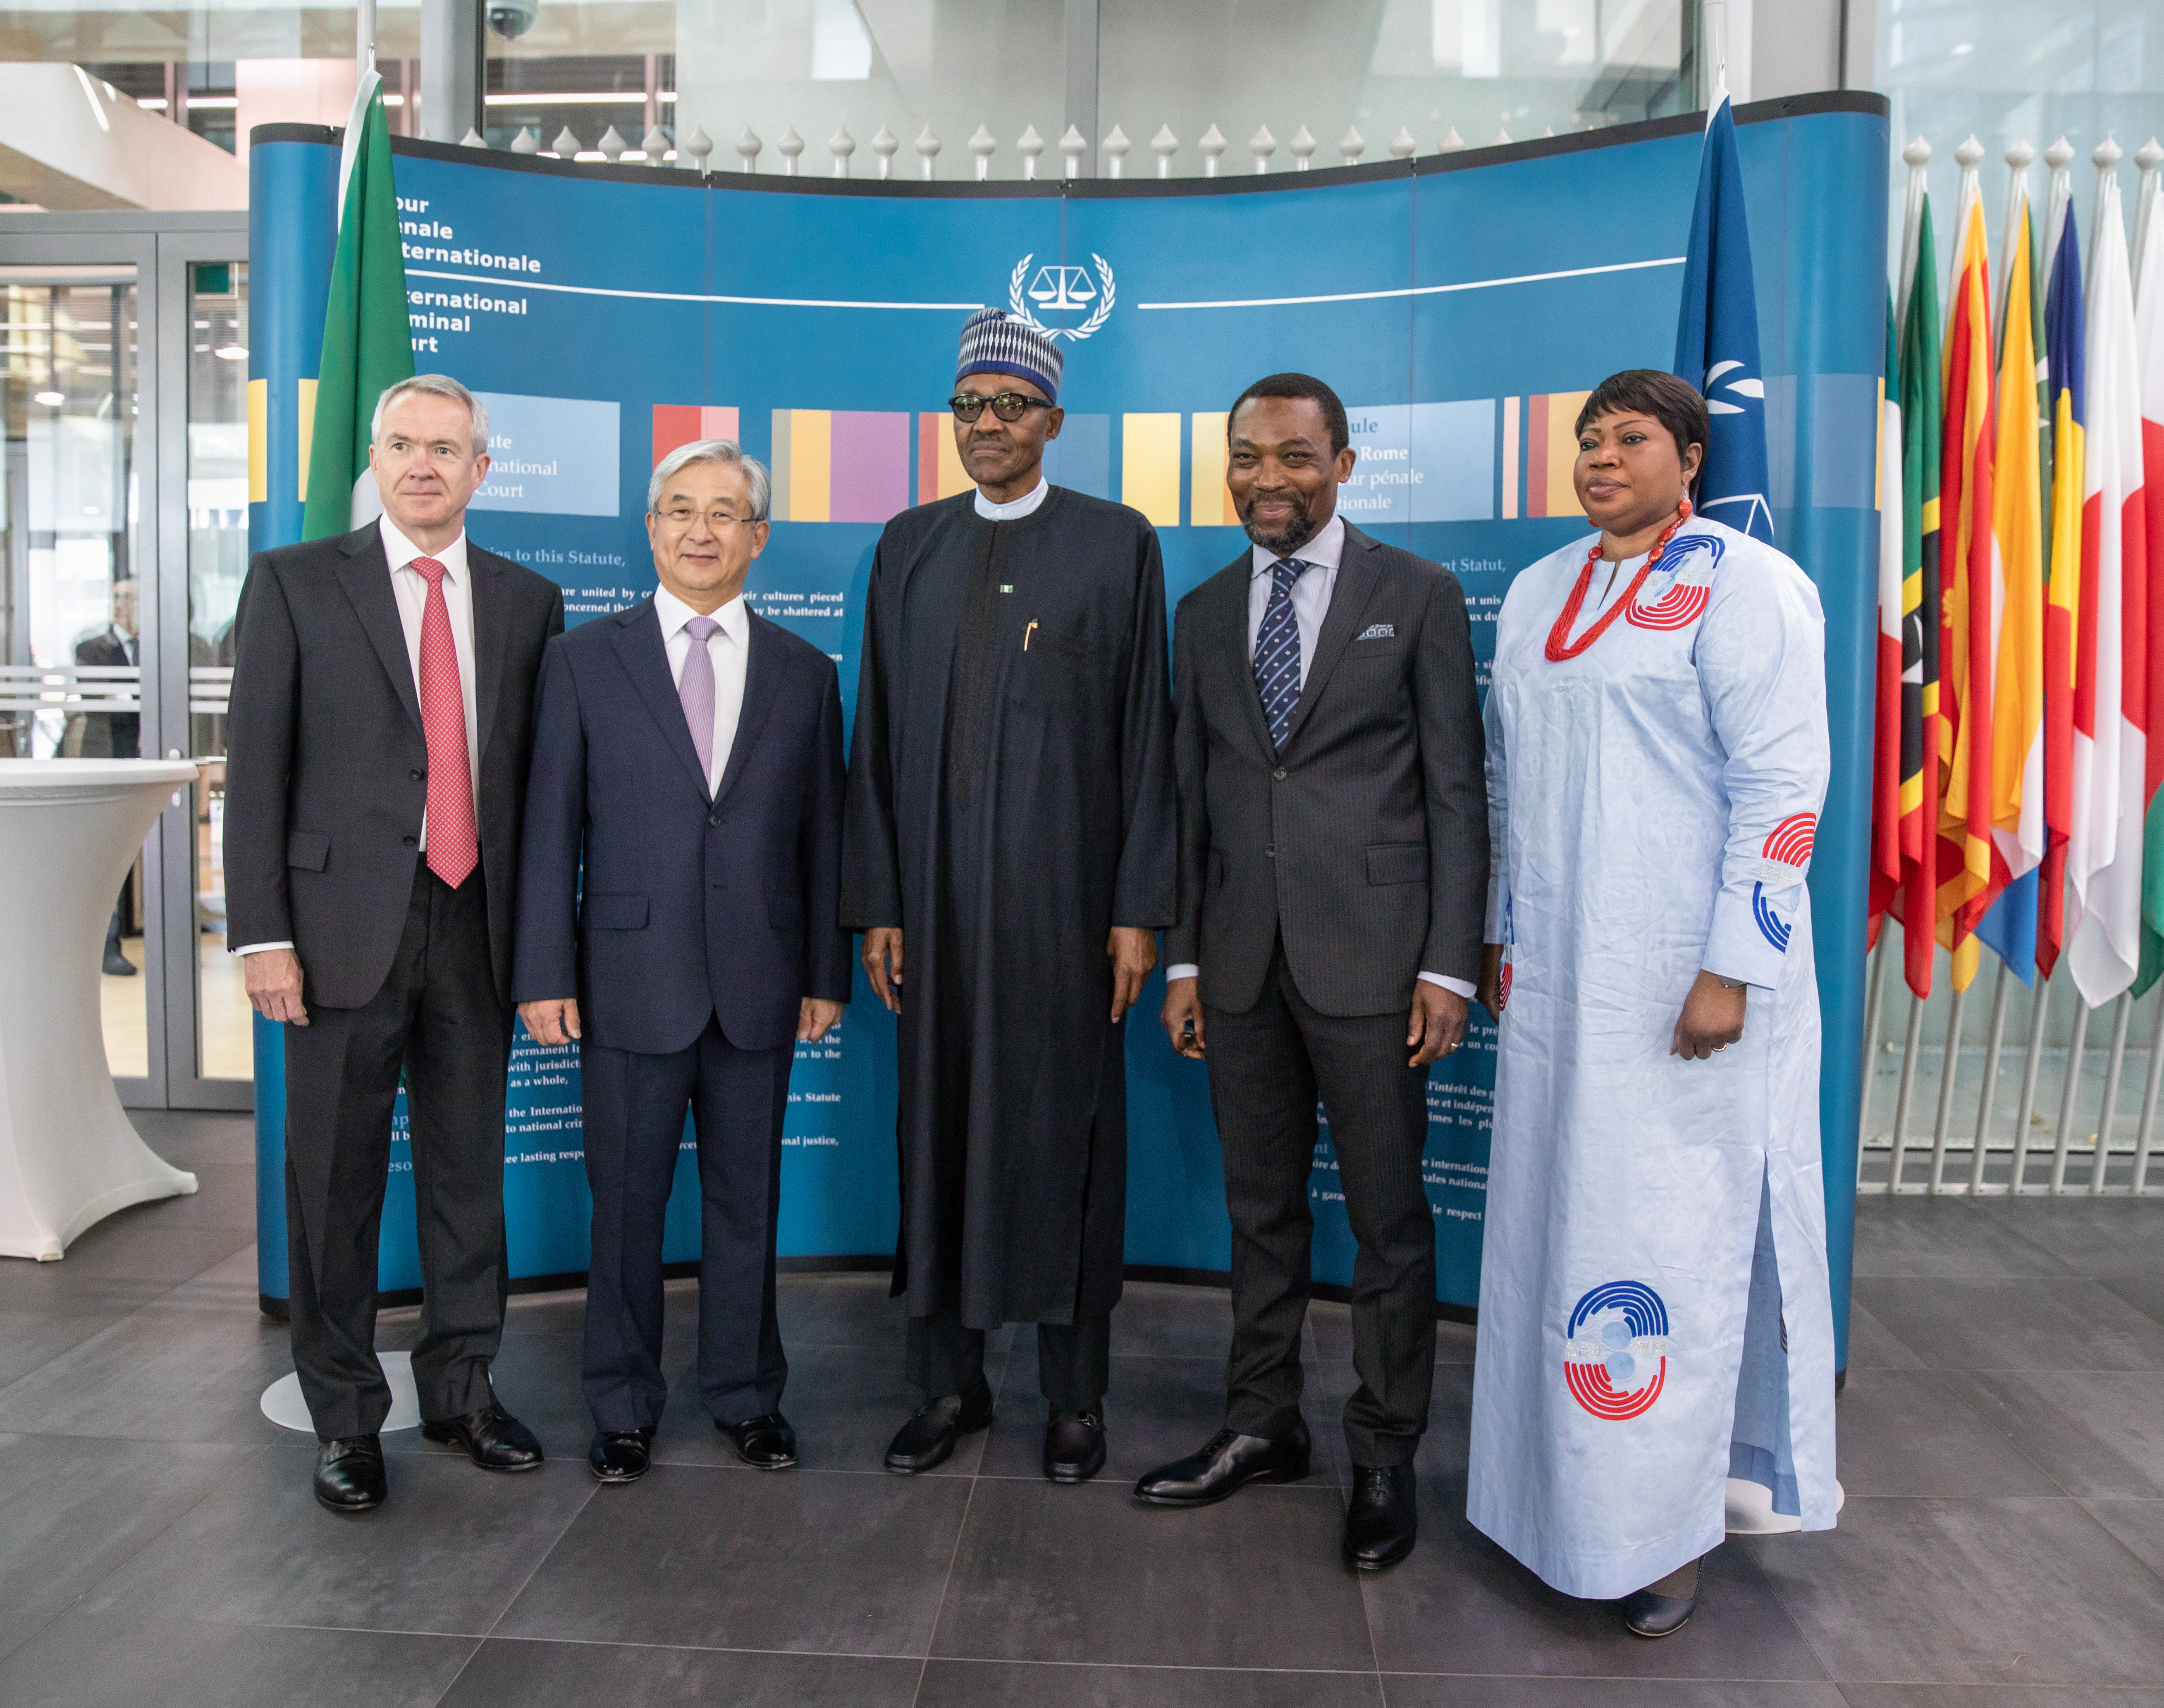 (Left to right) ICC Registrar Mr Peter Lewis, ASP President H.E. O-Gon Kwon, President of Nigeria H.E. Muhammadu Buhari, ICC President Judge Chile Eboe-Osuji and ICC Prosecutor Fatou Bensouda at the high-level commemorations of the Rome Statute’s anniversary on 17 July 2018 ©ICC-CPI 